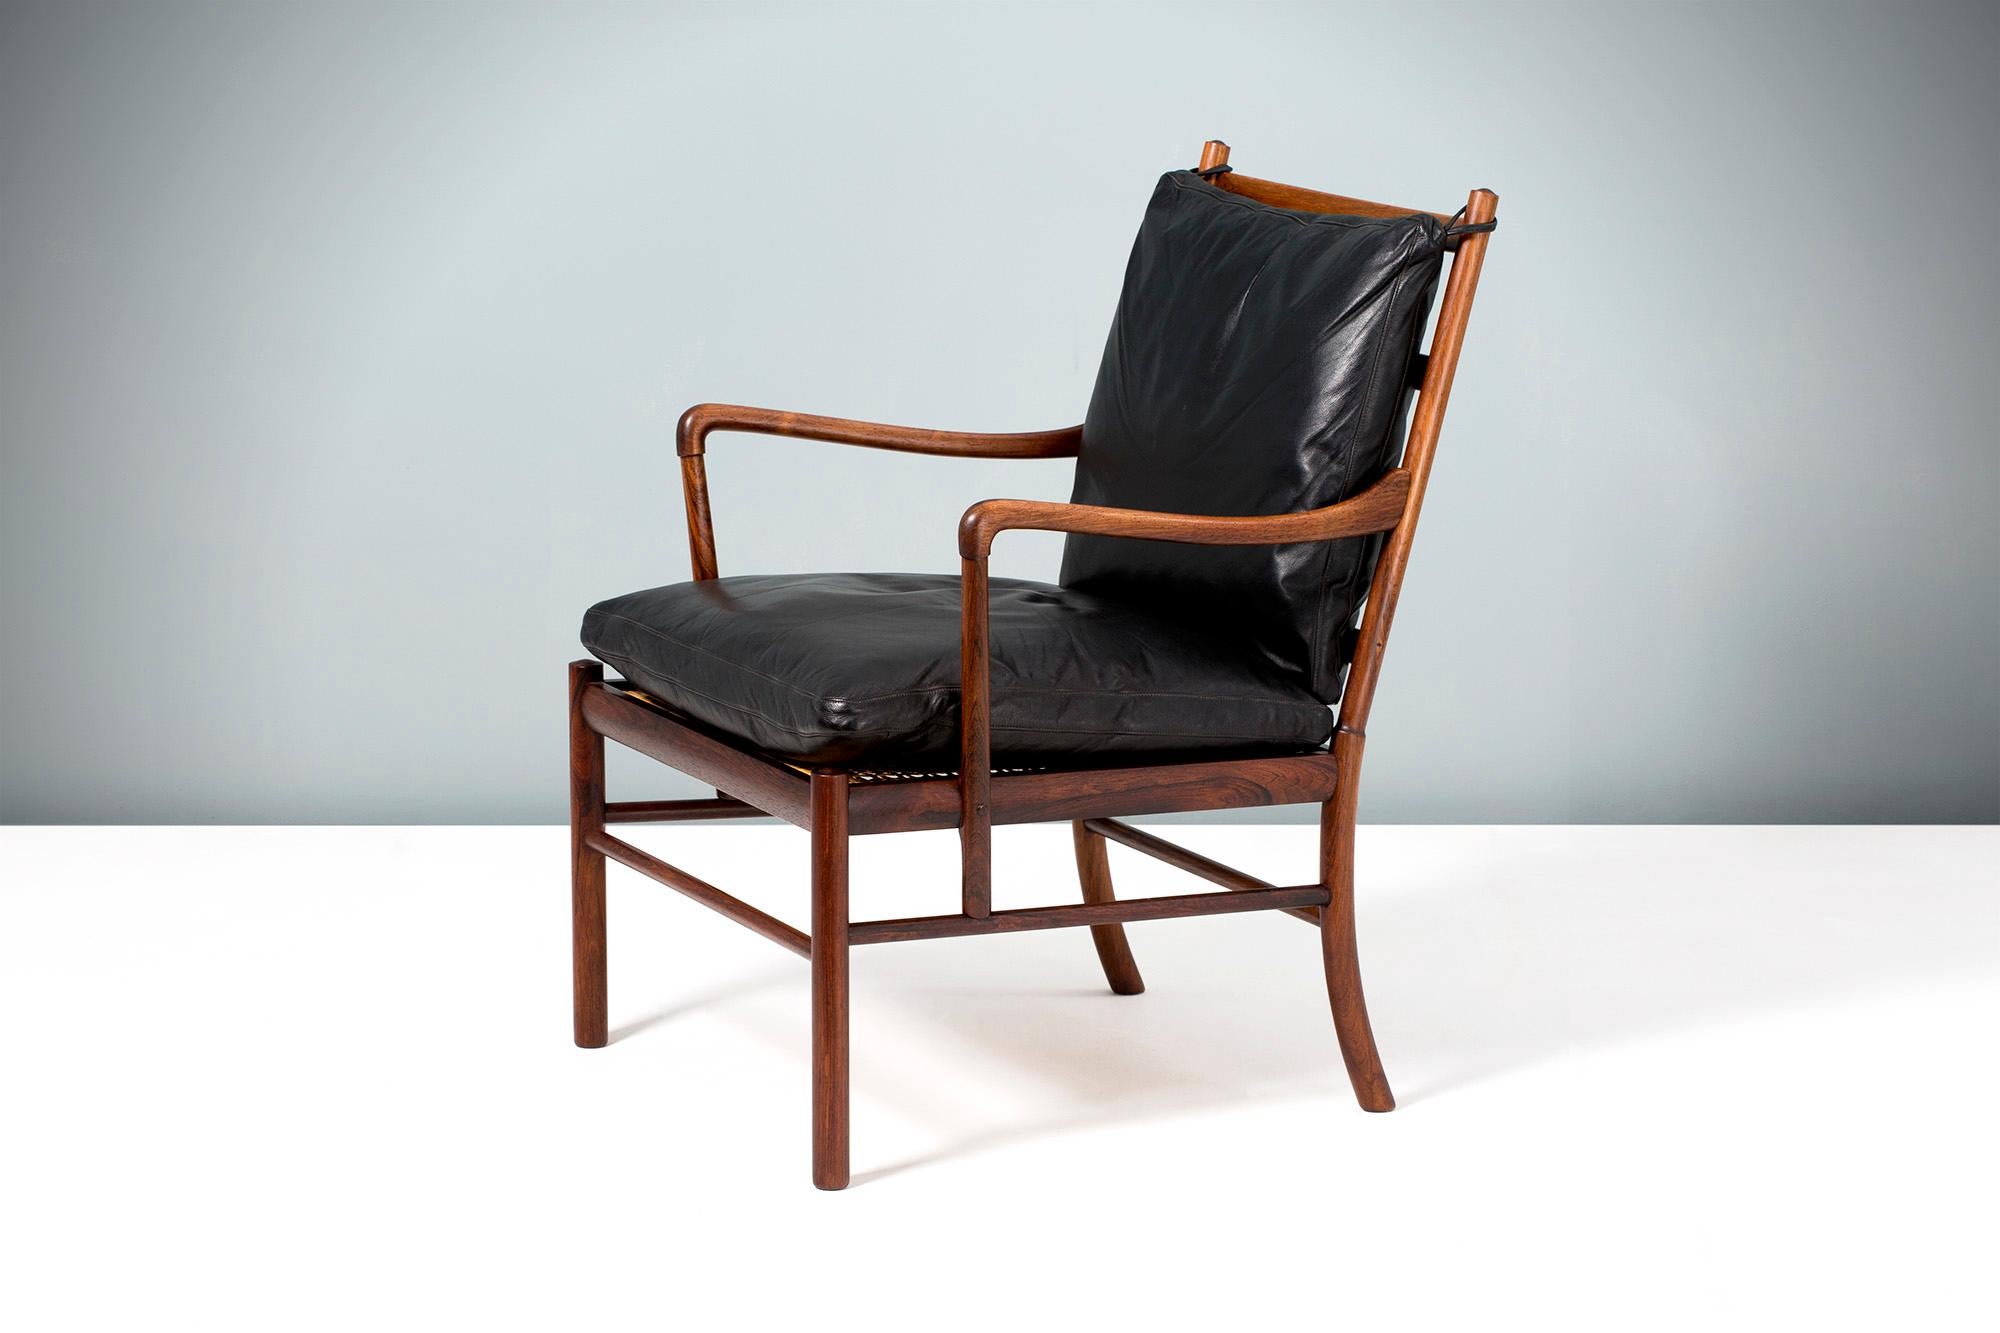 Ole Wanscher

PJ-149 Colonial chair, 1949

A fine example of Ole Wanscher's most iconic design: The Colonial chair. Produced by Poul Jeppesen in Denmark circa 1950s in exquisite Brazilian rosewood with original woven rattan cane seat and